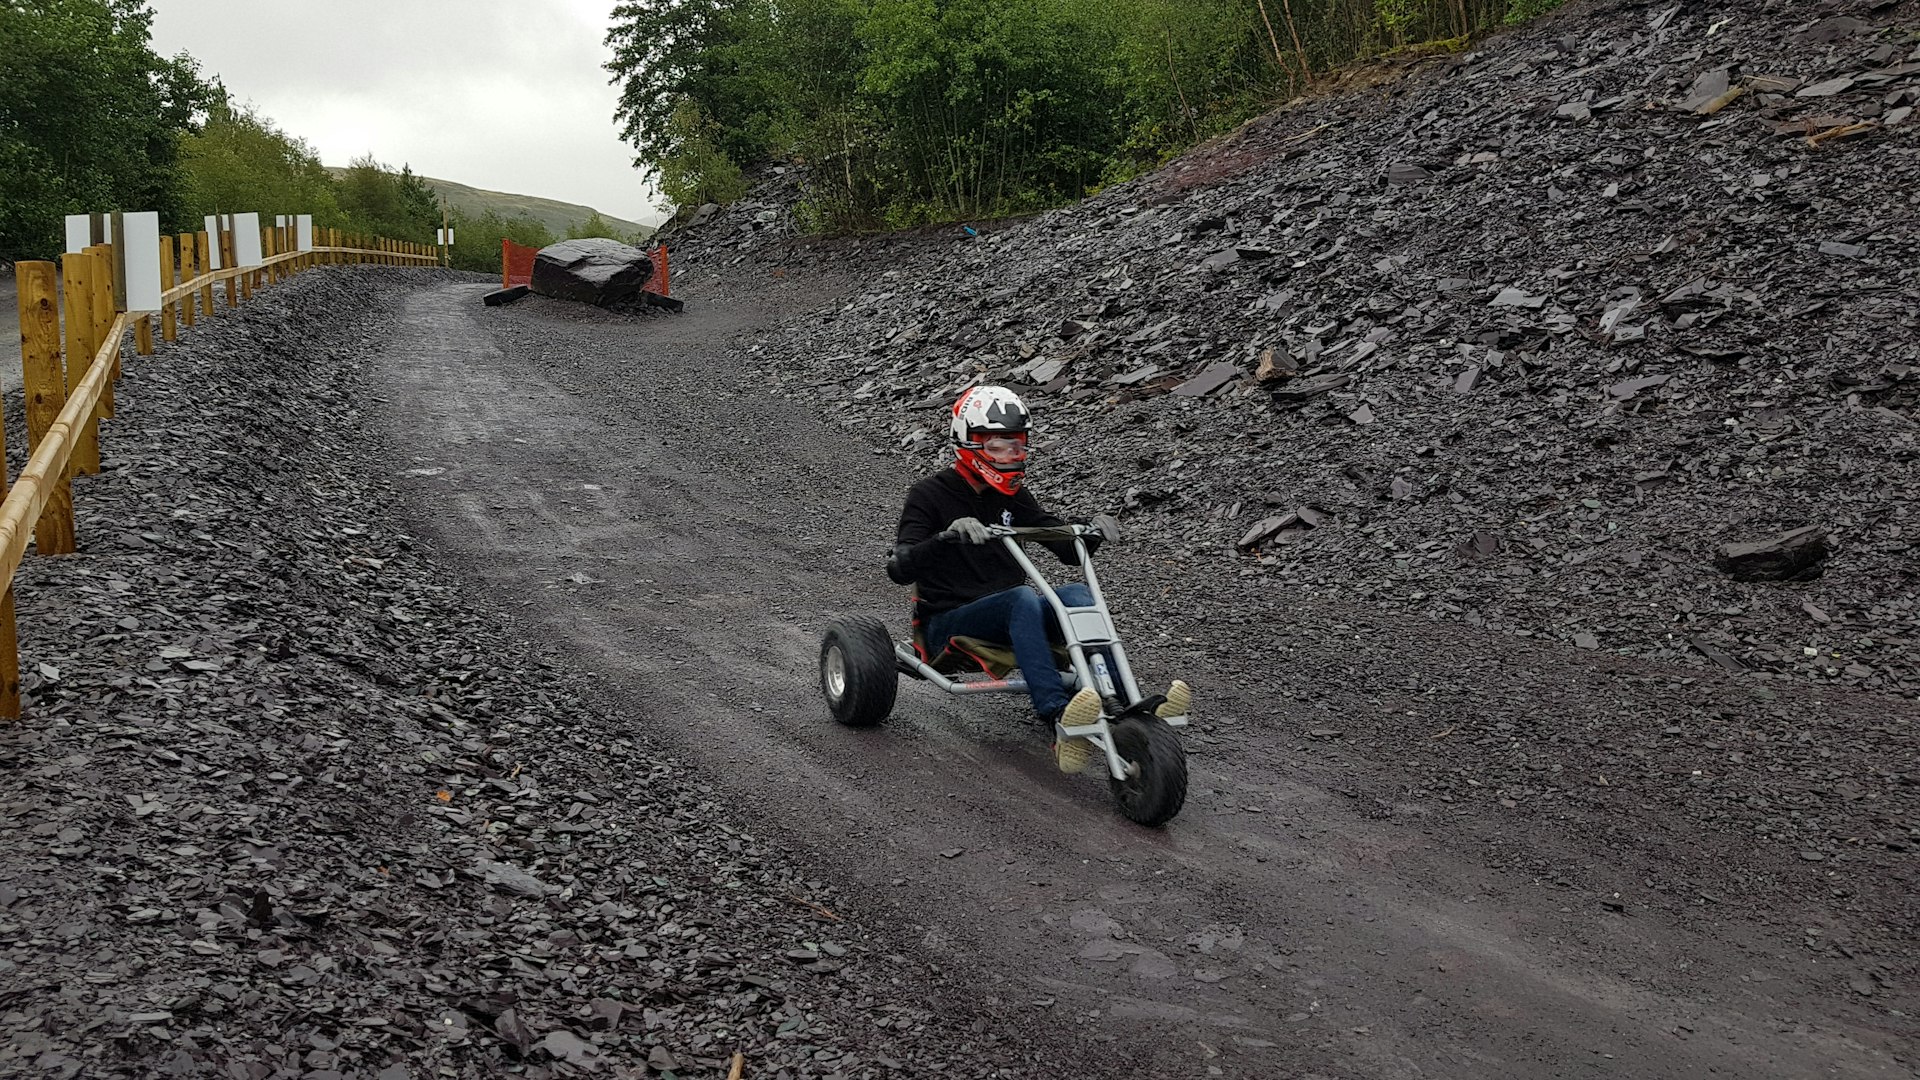 A pre-teen boy in a black sweater and white and red motorcycle helmet rides down a black shale track on a three-wheeled steel racing trike